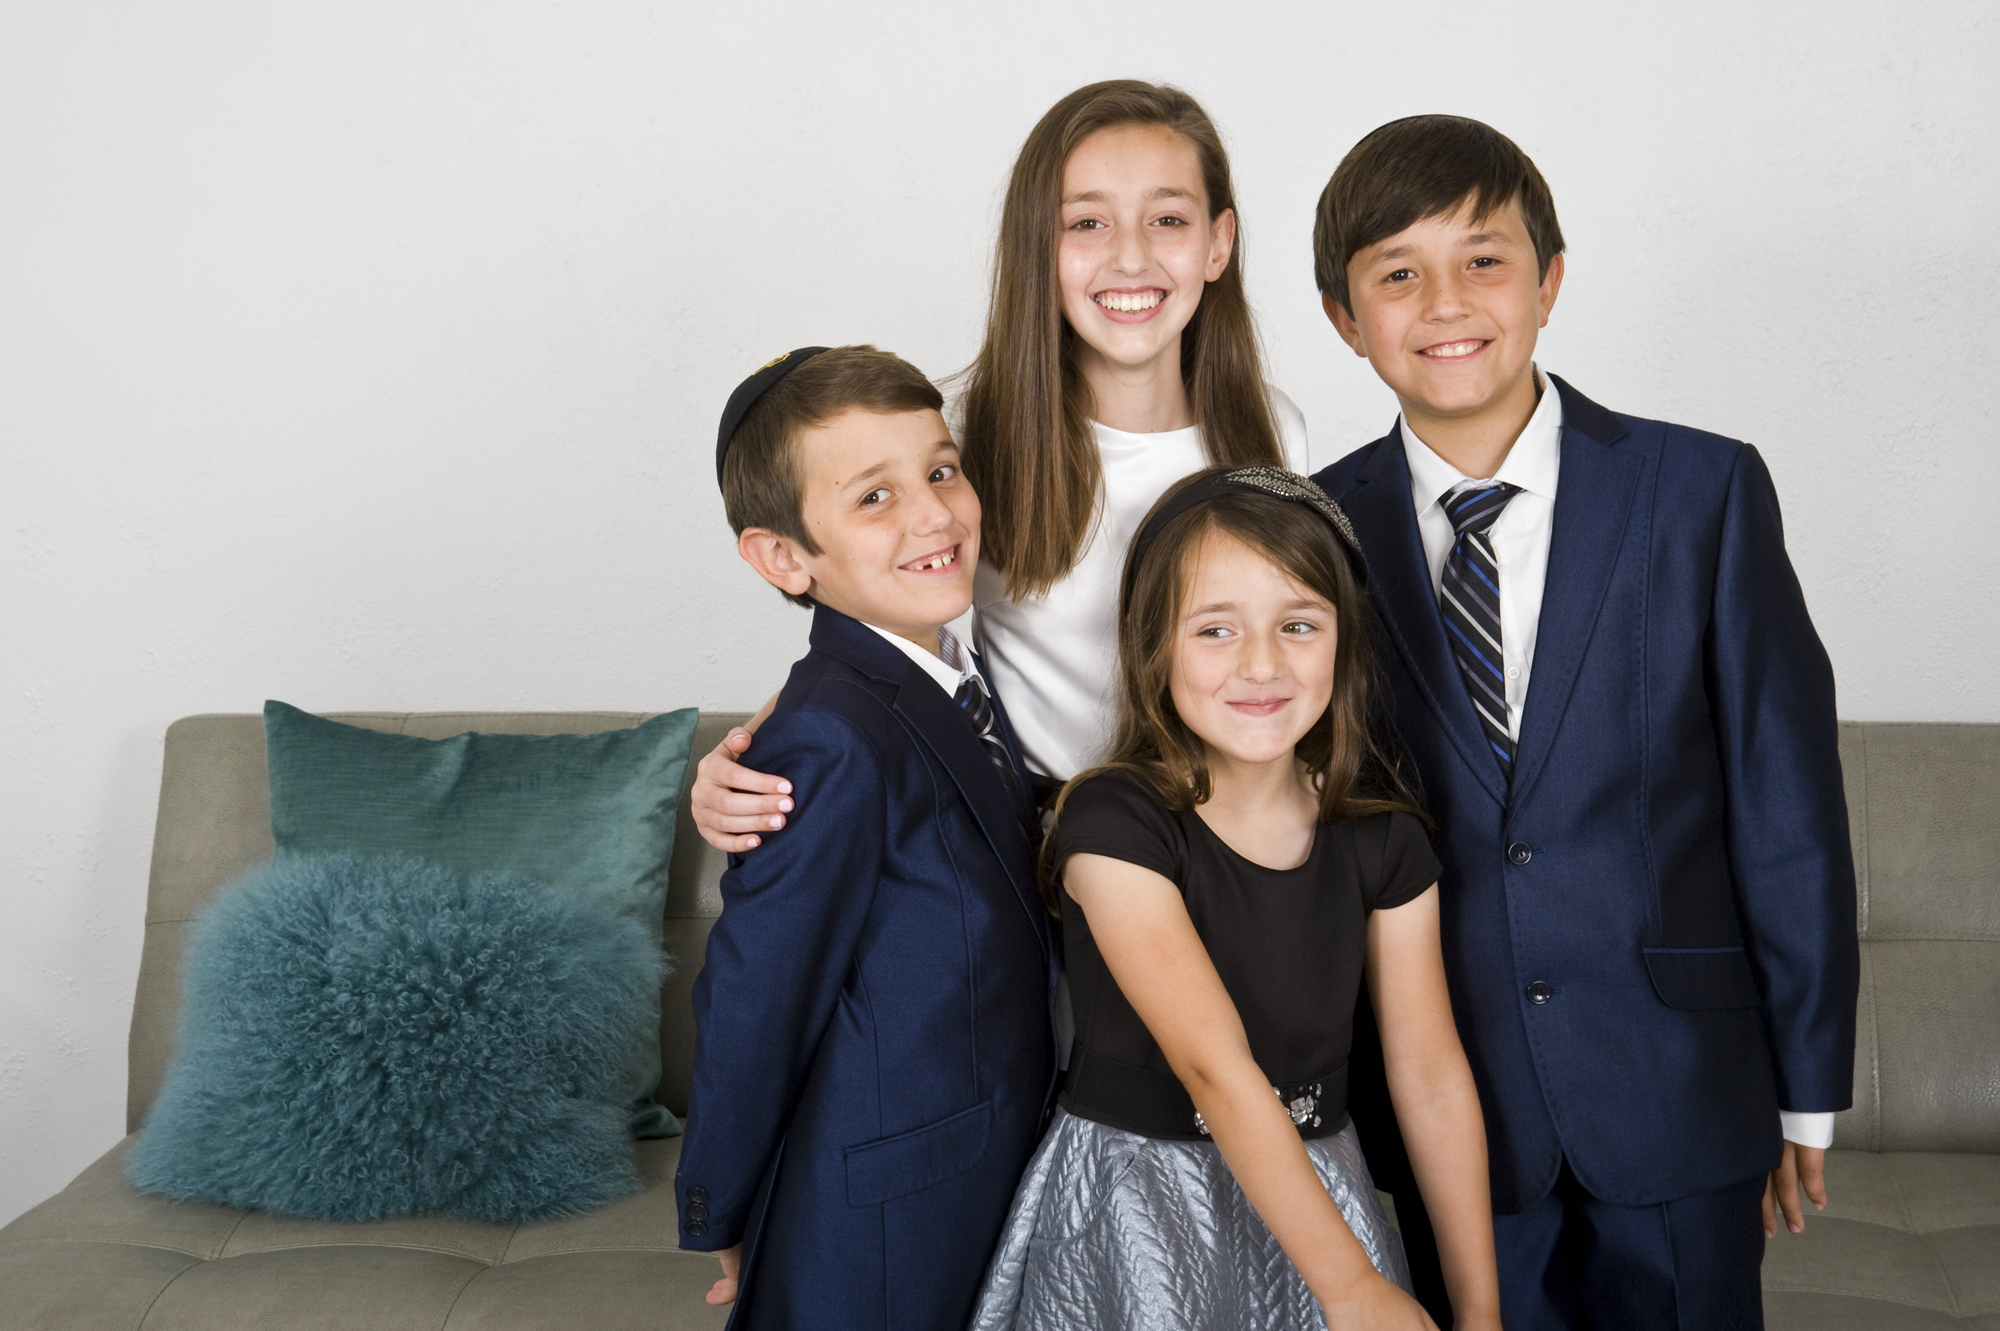 In celebration of Isabella Sztuden's, 11, upcoming Bat Mitzvah, the Sztuden's and their extended family from out of town have family portraits taken at the childhood home of Isabella's mother, Leslee, on Friday, June 24, 2016 in Sherman Oaks, Calif.  Isabella Sztuden is surrounded by her siblings, Aiden Sztuden, 10, Benjamin Sztuden, 7, and Abigail Sztuden, 5. 